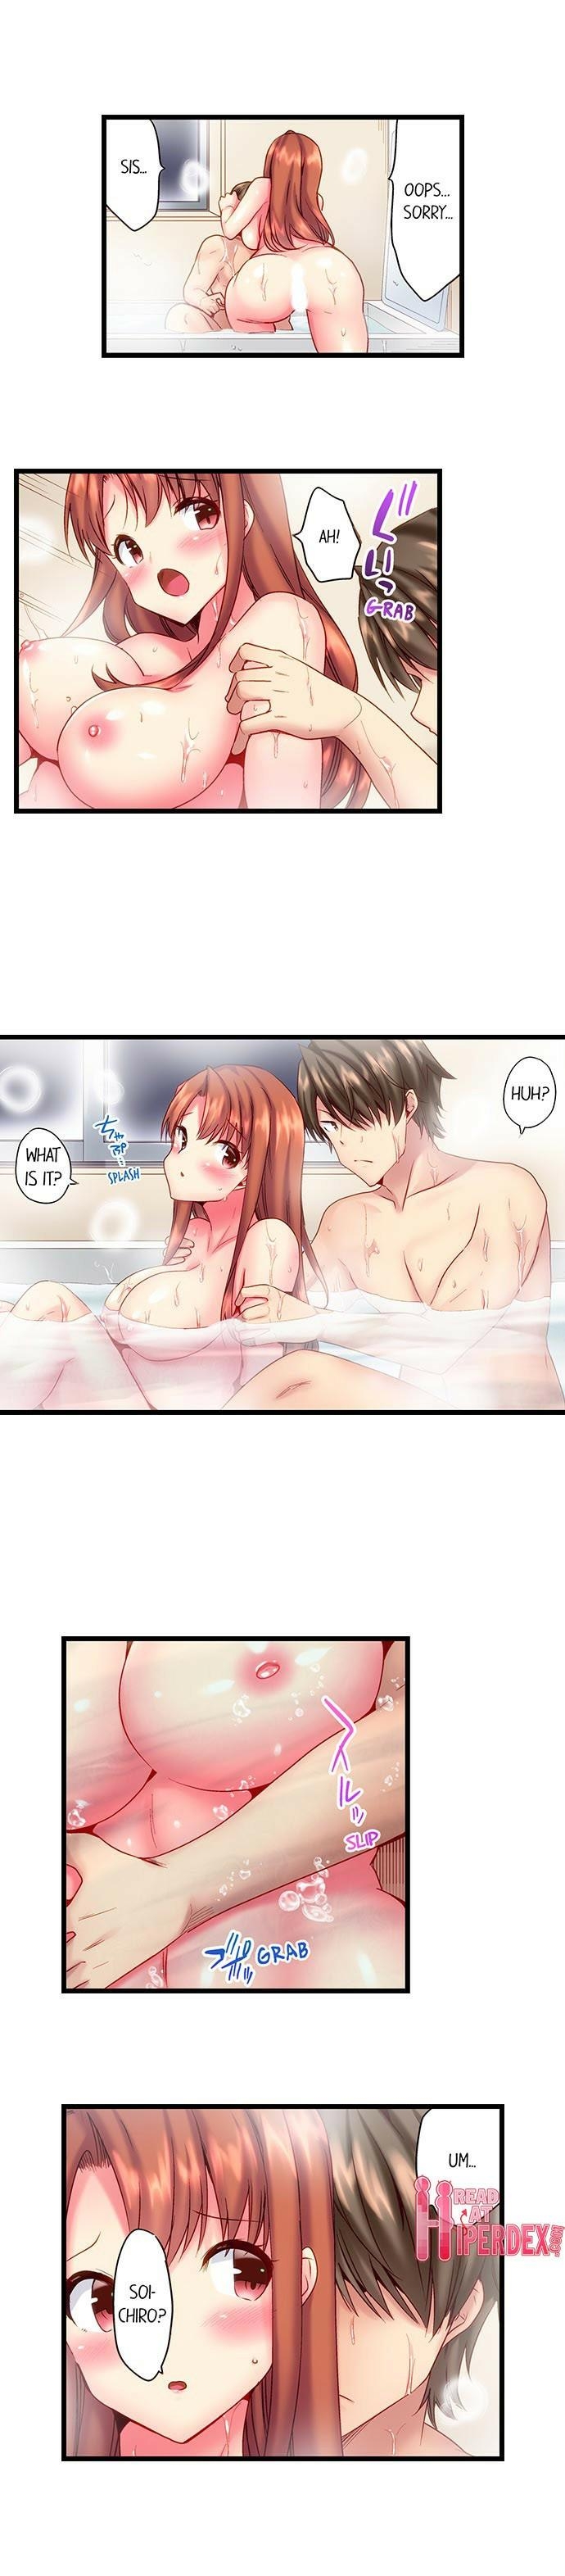 [Yuuki HB] "Hypnotized" Sex with My Brother Ch.21/? [English] [Ongoing] 150